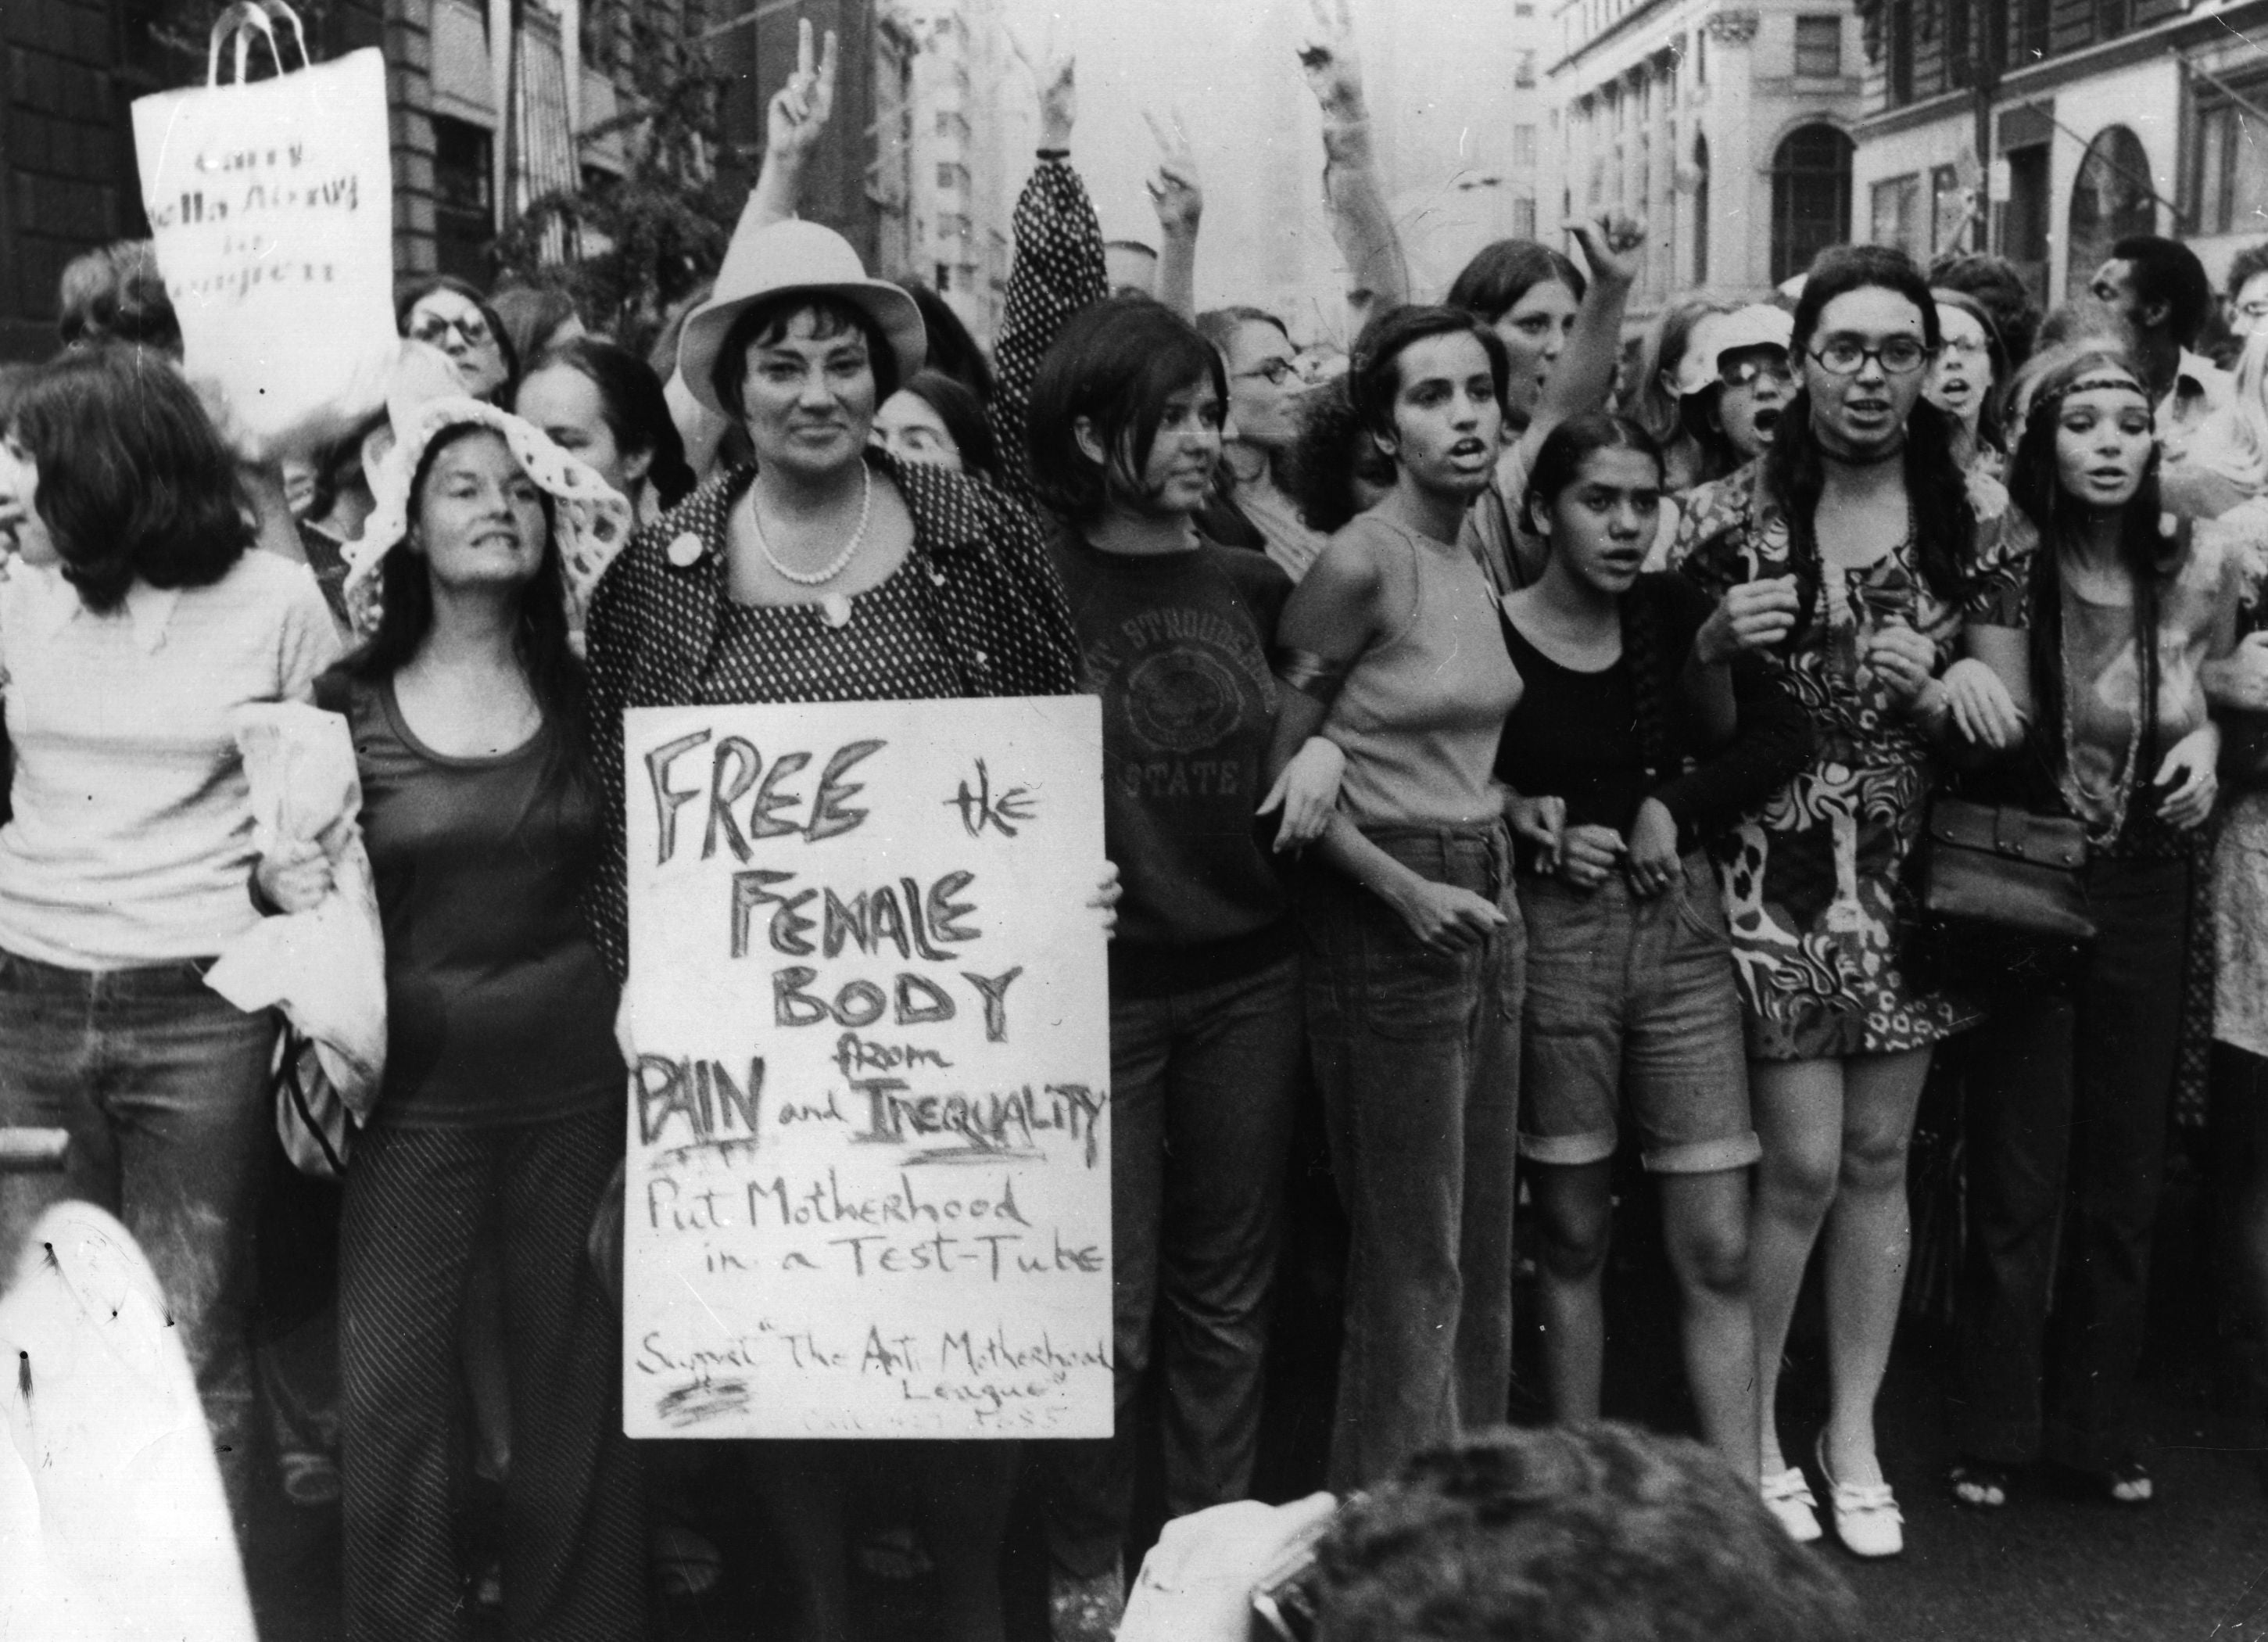 Bella Abzug carries an anti-motherhood sign on the 50th anniversary of women winning the vote in the United States